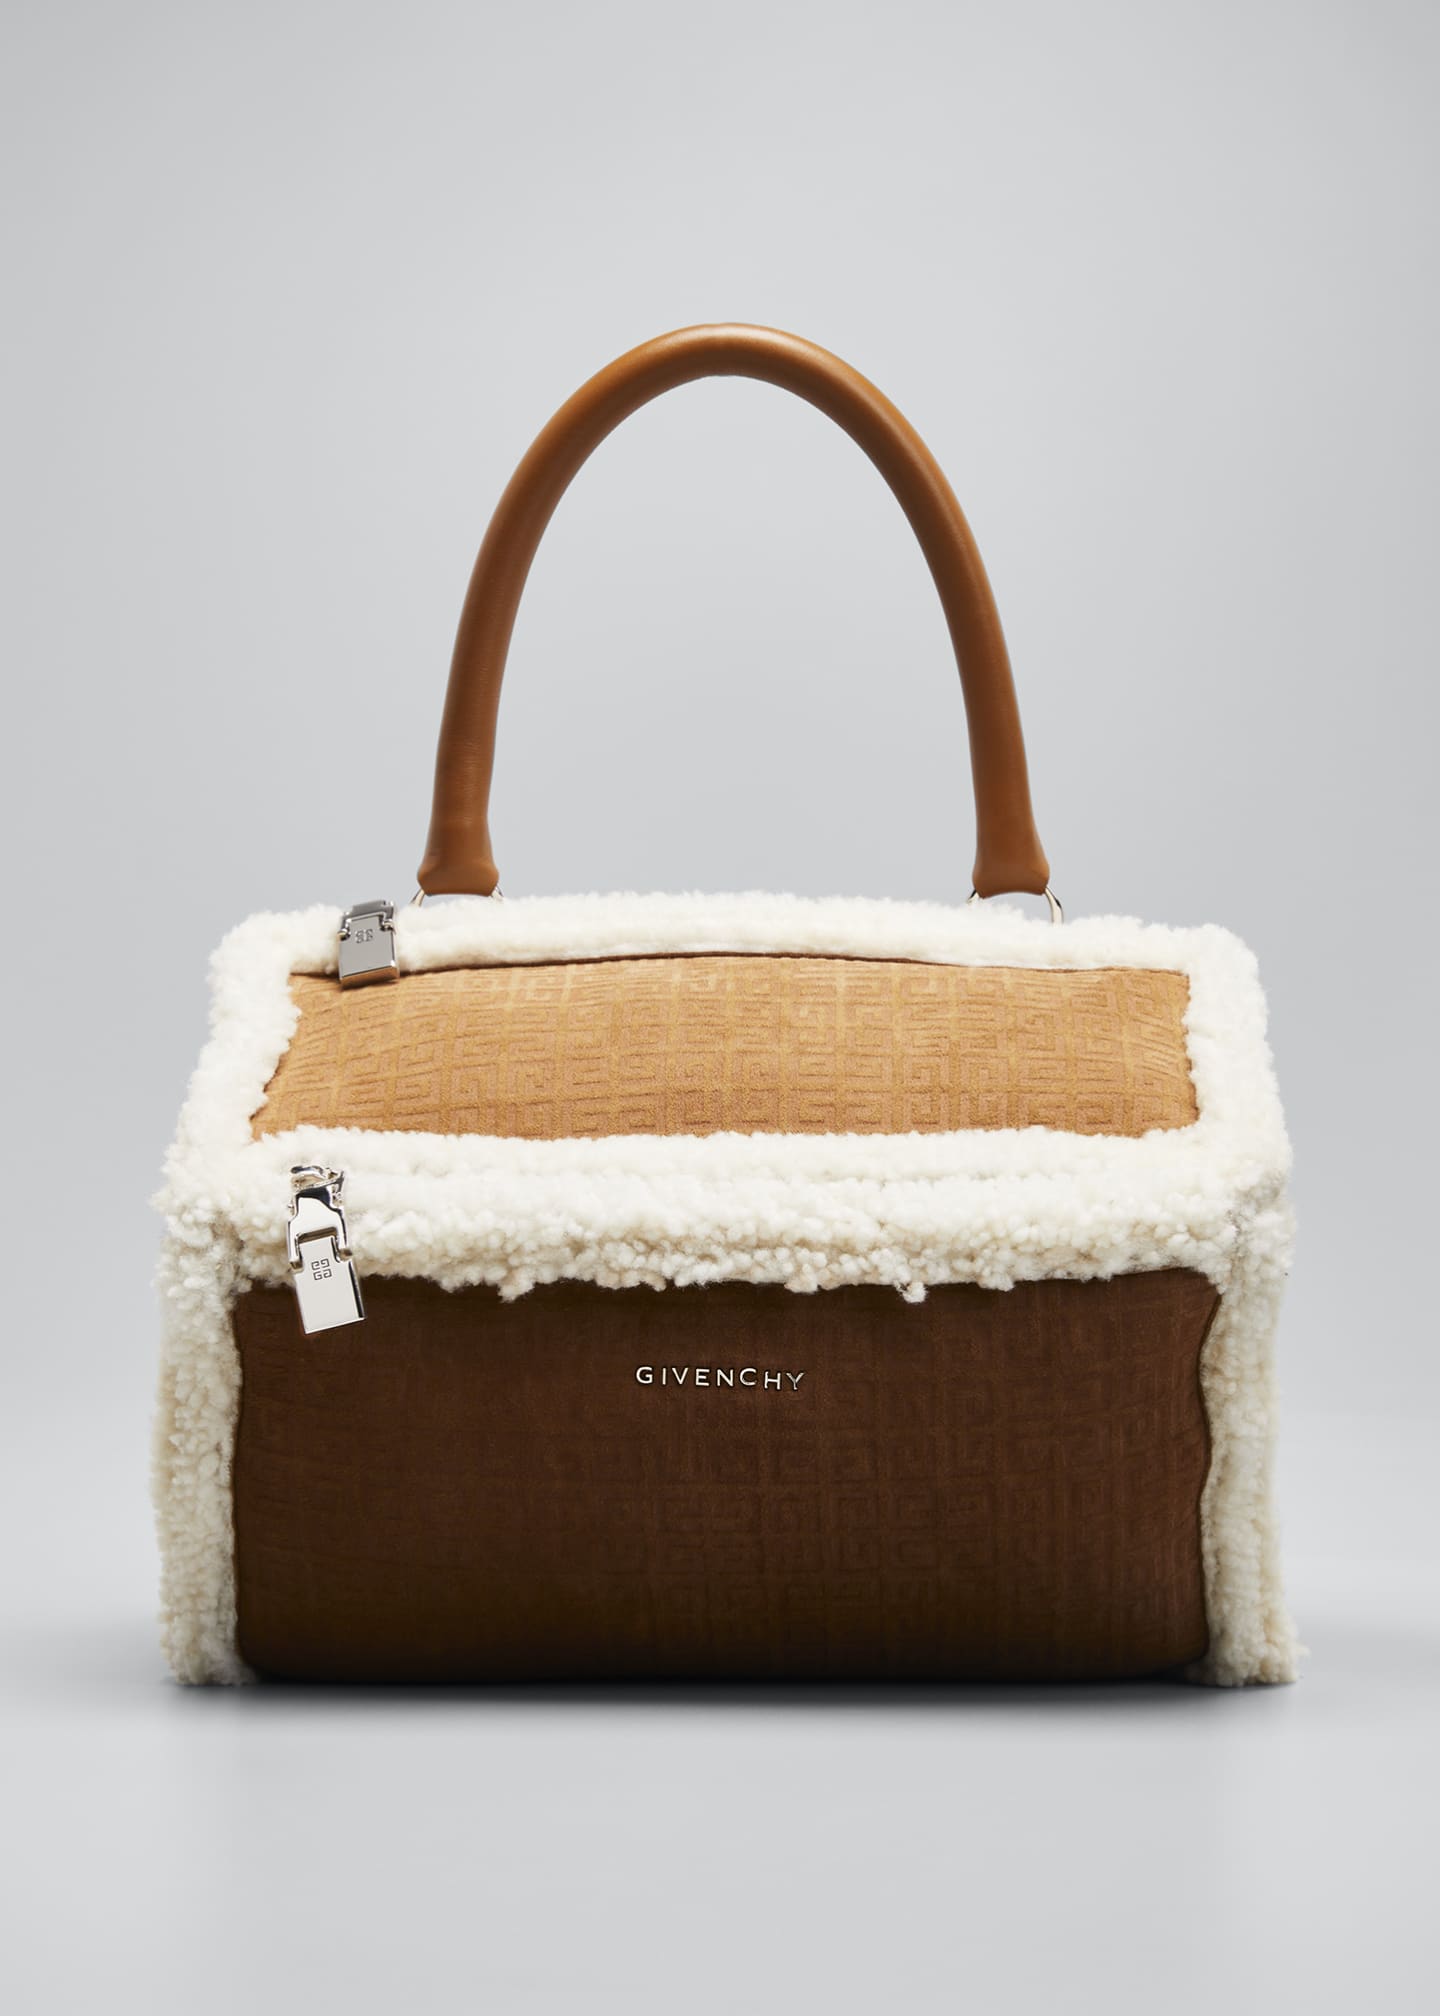 Givenchy Small Pandora Top-Handle Bag in Suede and Lamb Shearling Image 1 of 5